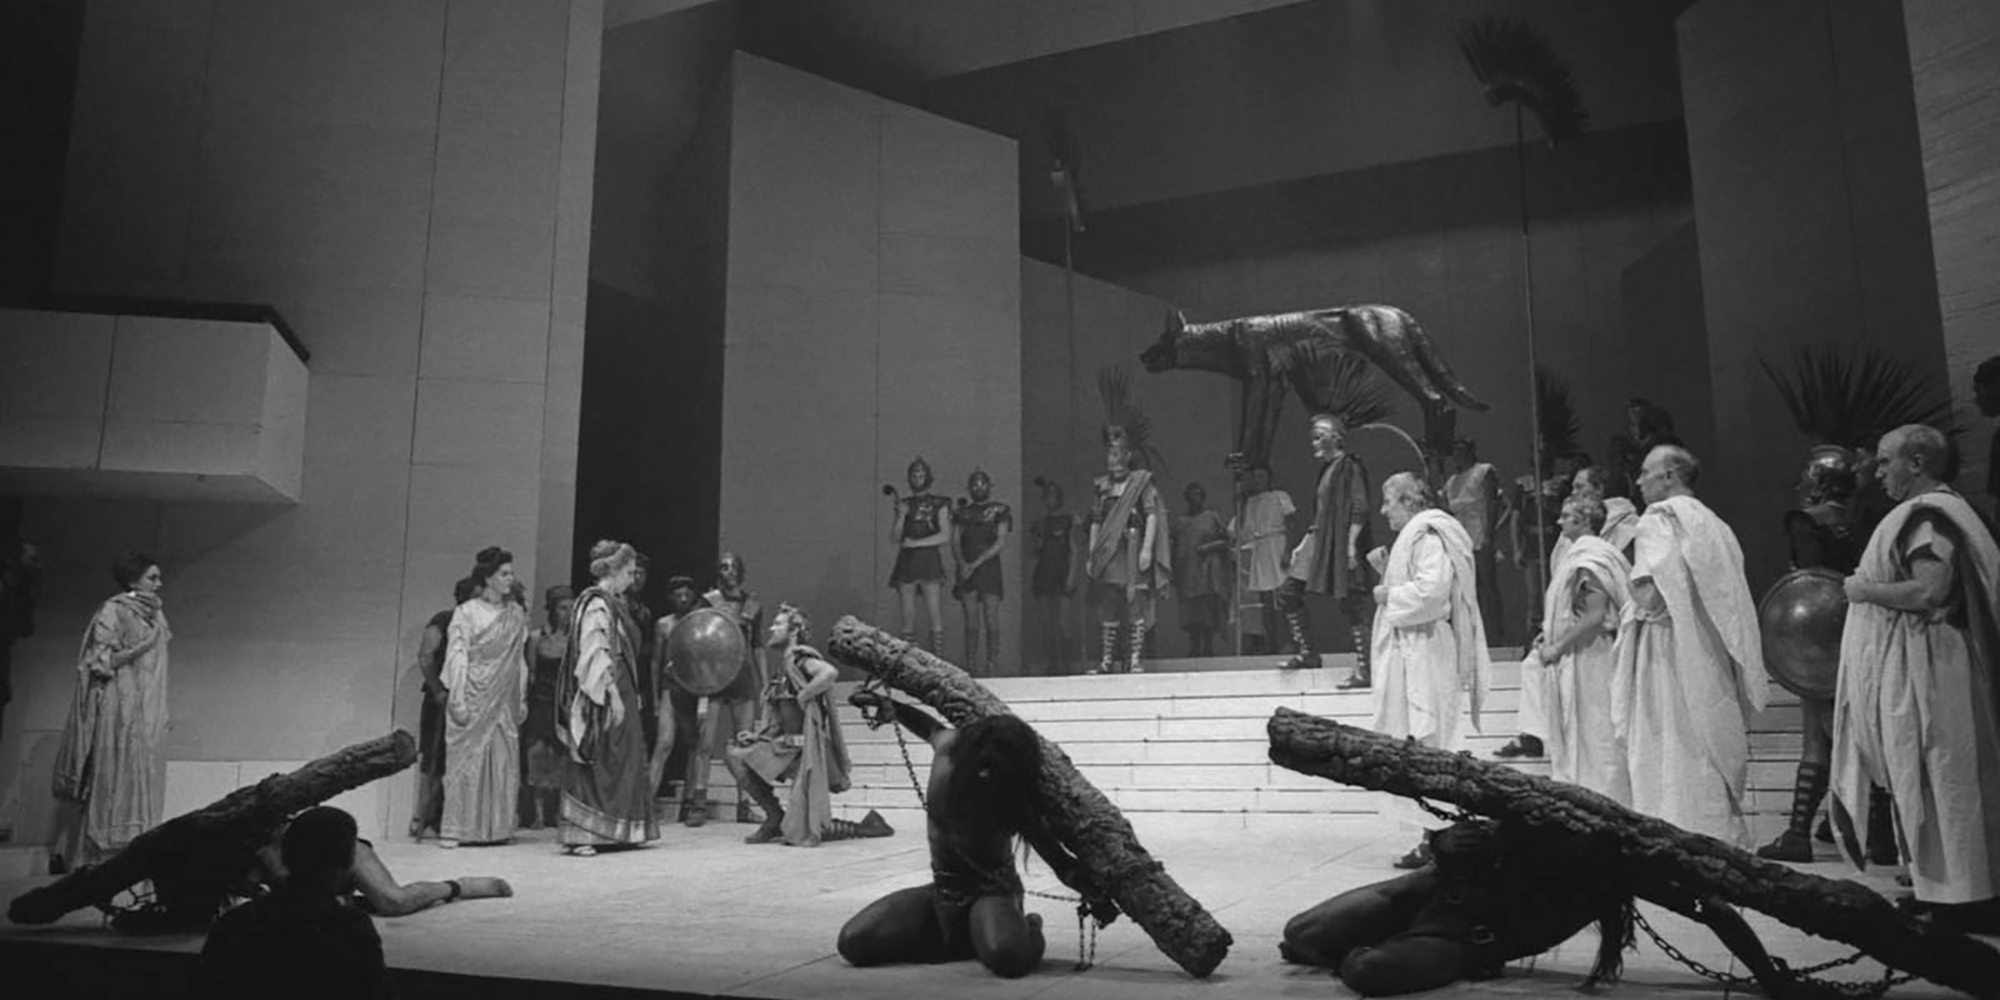 Black and white photograph of a proscenium stage, with a large group of actors standing in Roman garb: white tunics and robes, with plumed helmets.